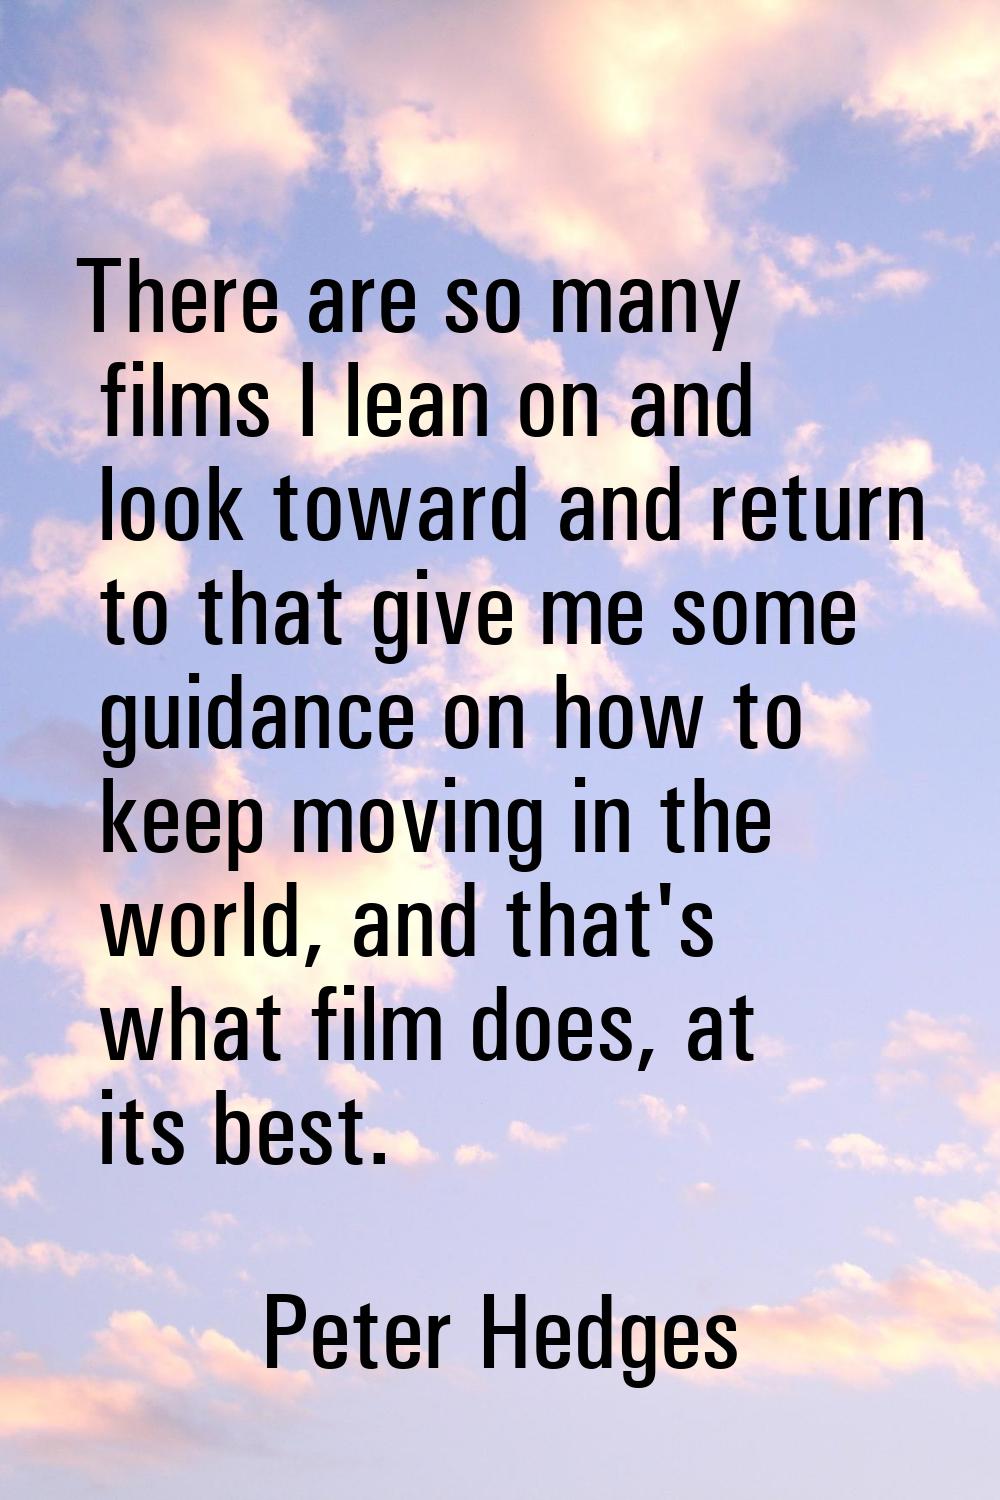 There are so many films I lean on and look toward and return to that give me some guidance on how t